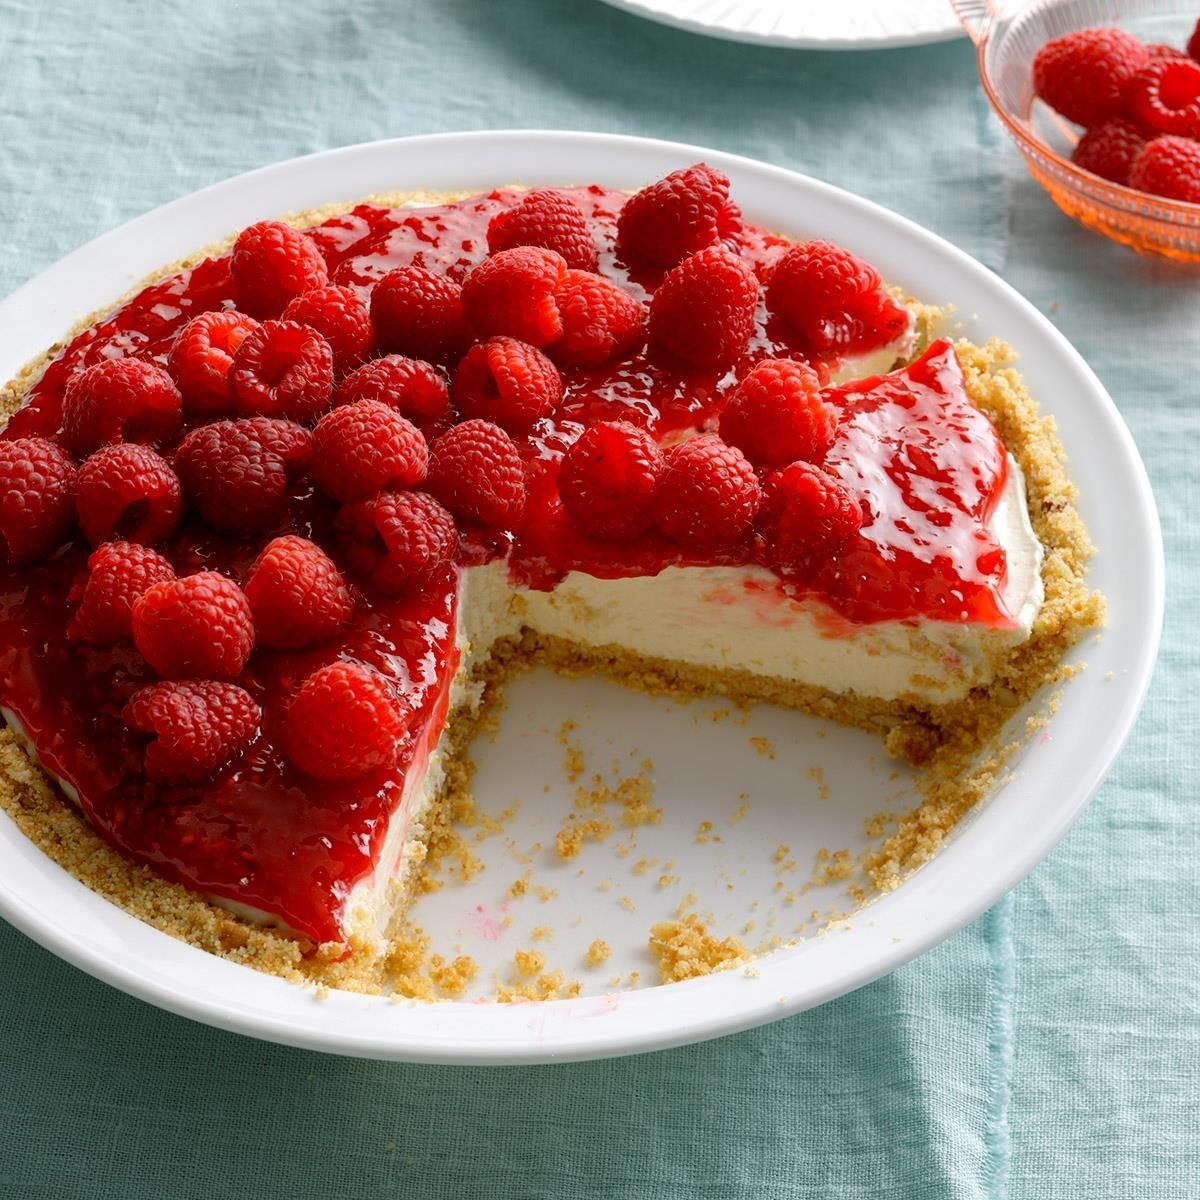 75 Things You Can Do with Fresh Raspberries